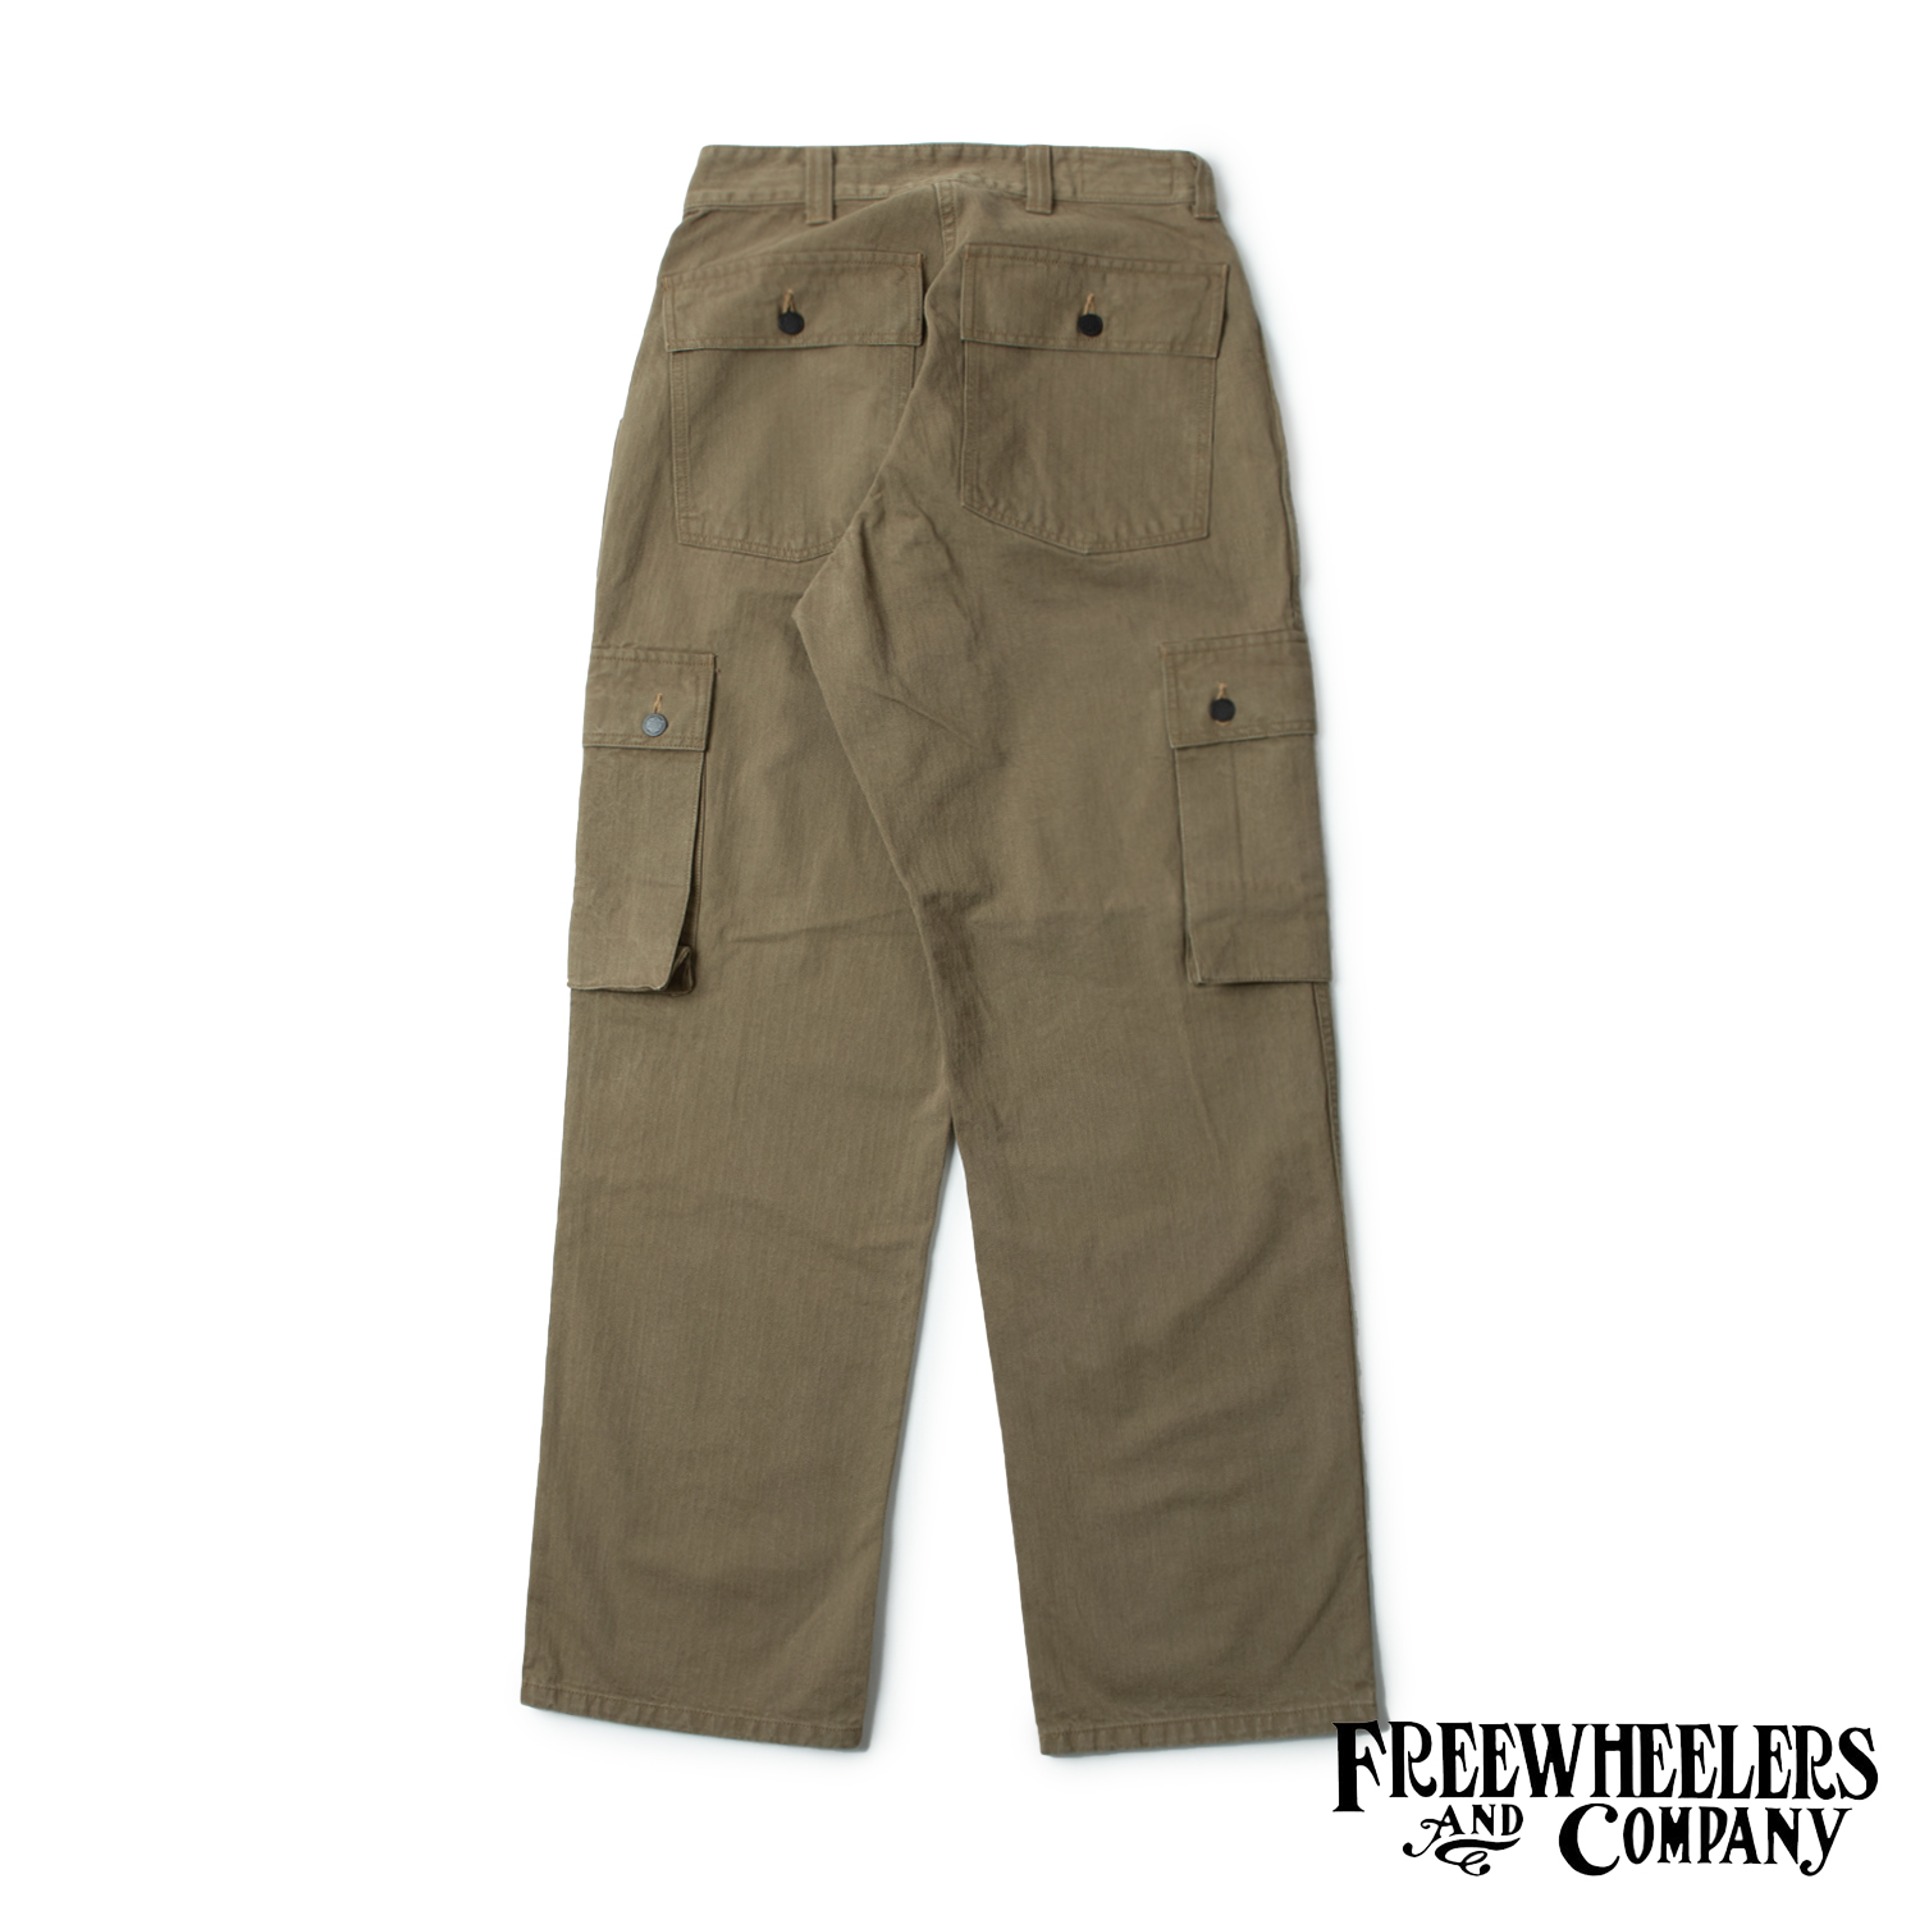  [UNION SPECIAL OVERALLS]   Military Trousers  “COMBAT UTILITY TROUSERS”  (Yarn Dyed Khaki)  (5/3 Open)